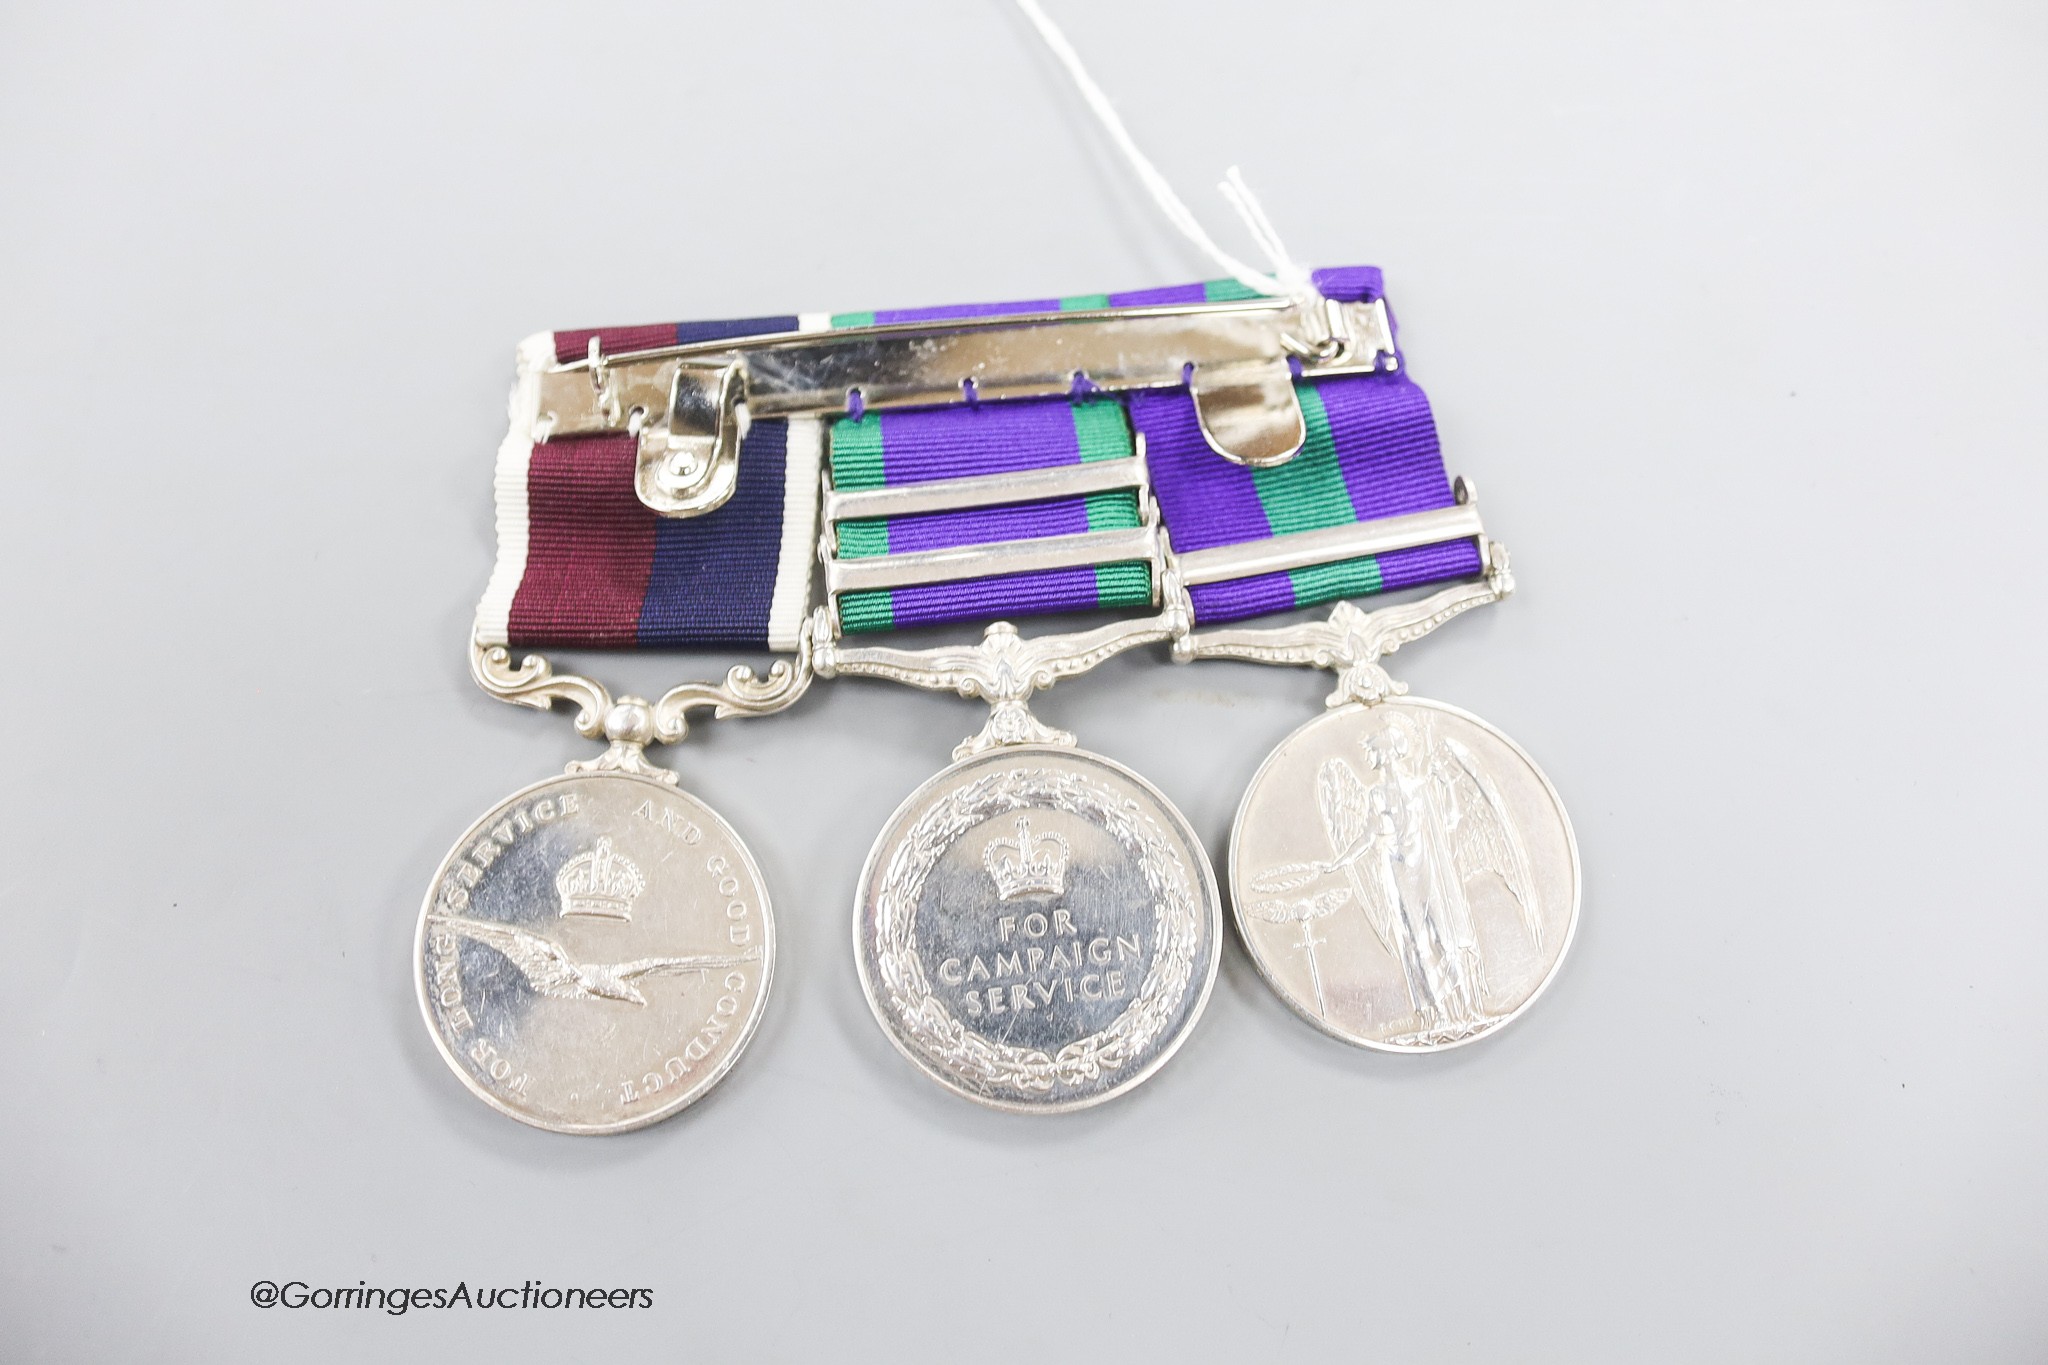 Trio of medals to N4021907, Corporal R J Galloway, RAF comprising GVI GSM with Malaya clasp, QEII GSM with South Arabia and Radfan clasps and a QEII for long service and good conduct medal